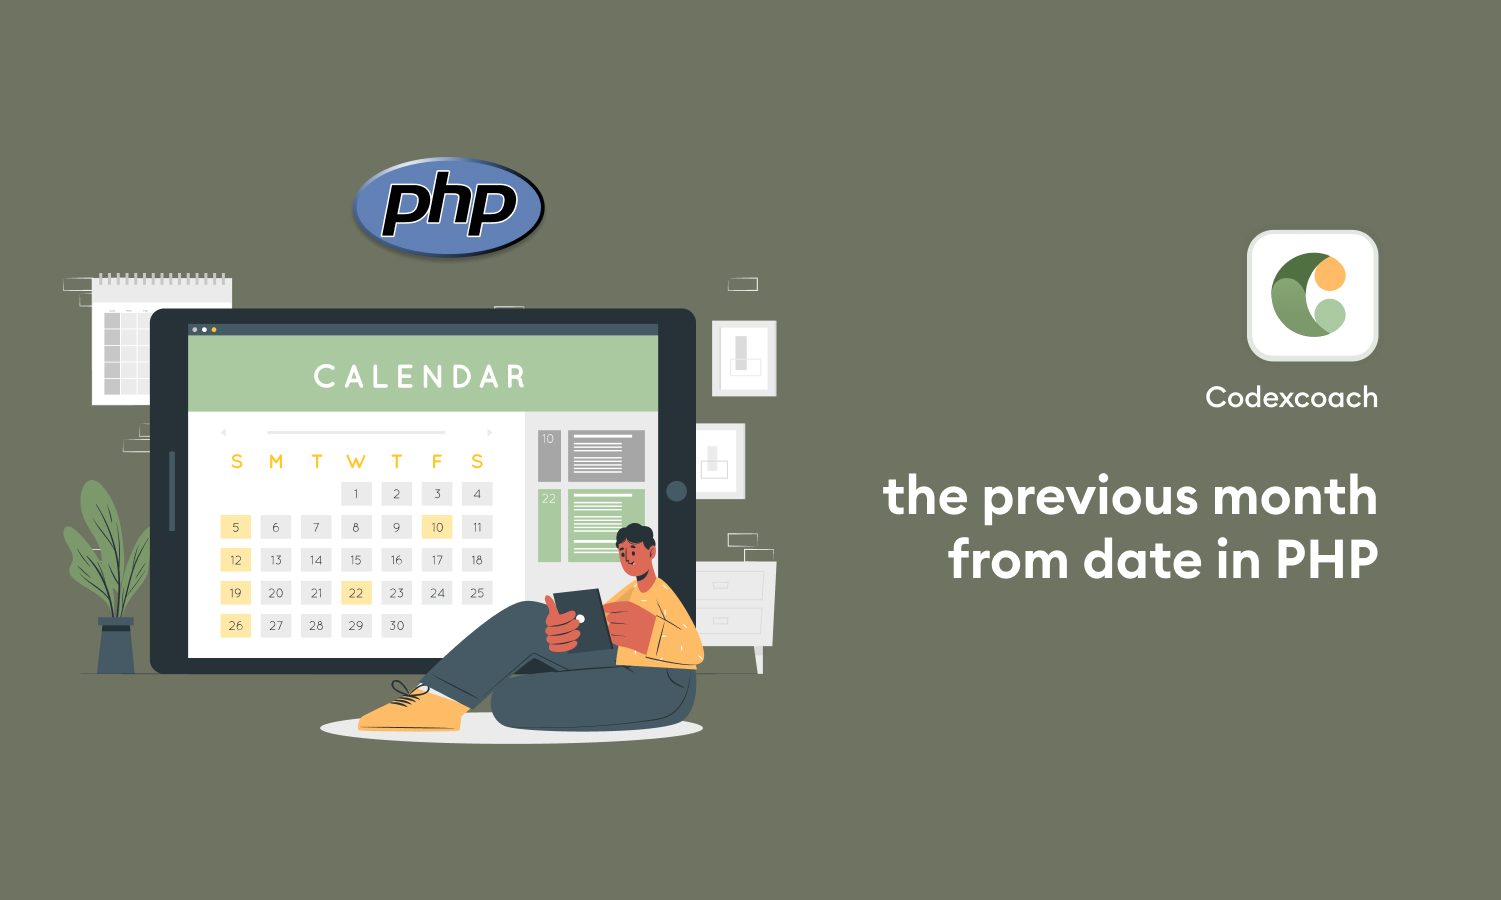 How to get the previous month from date in PHP